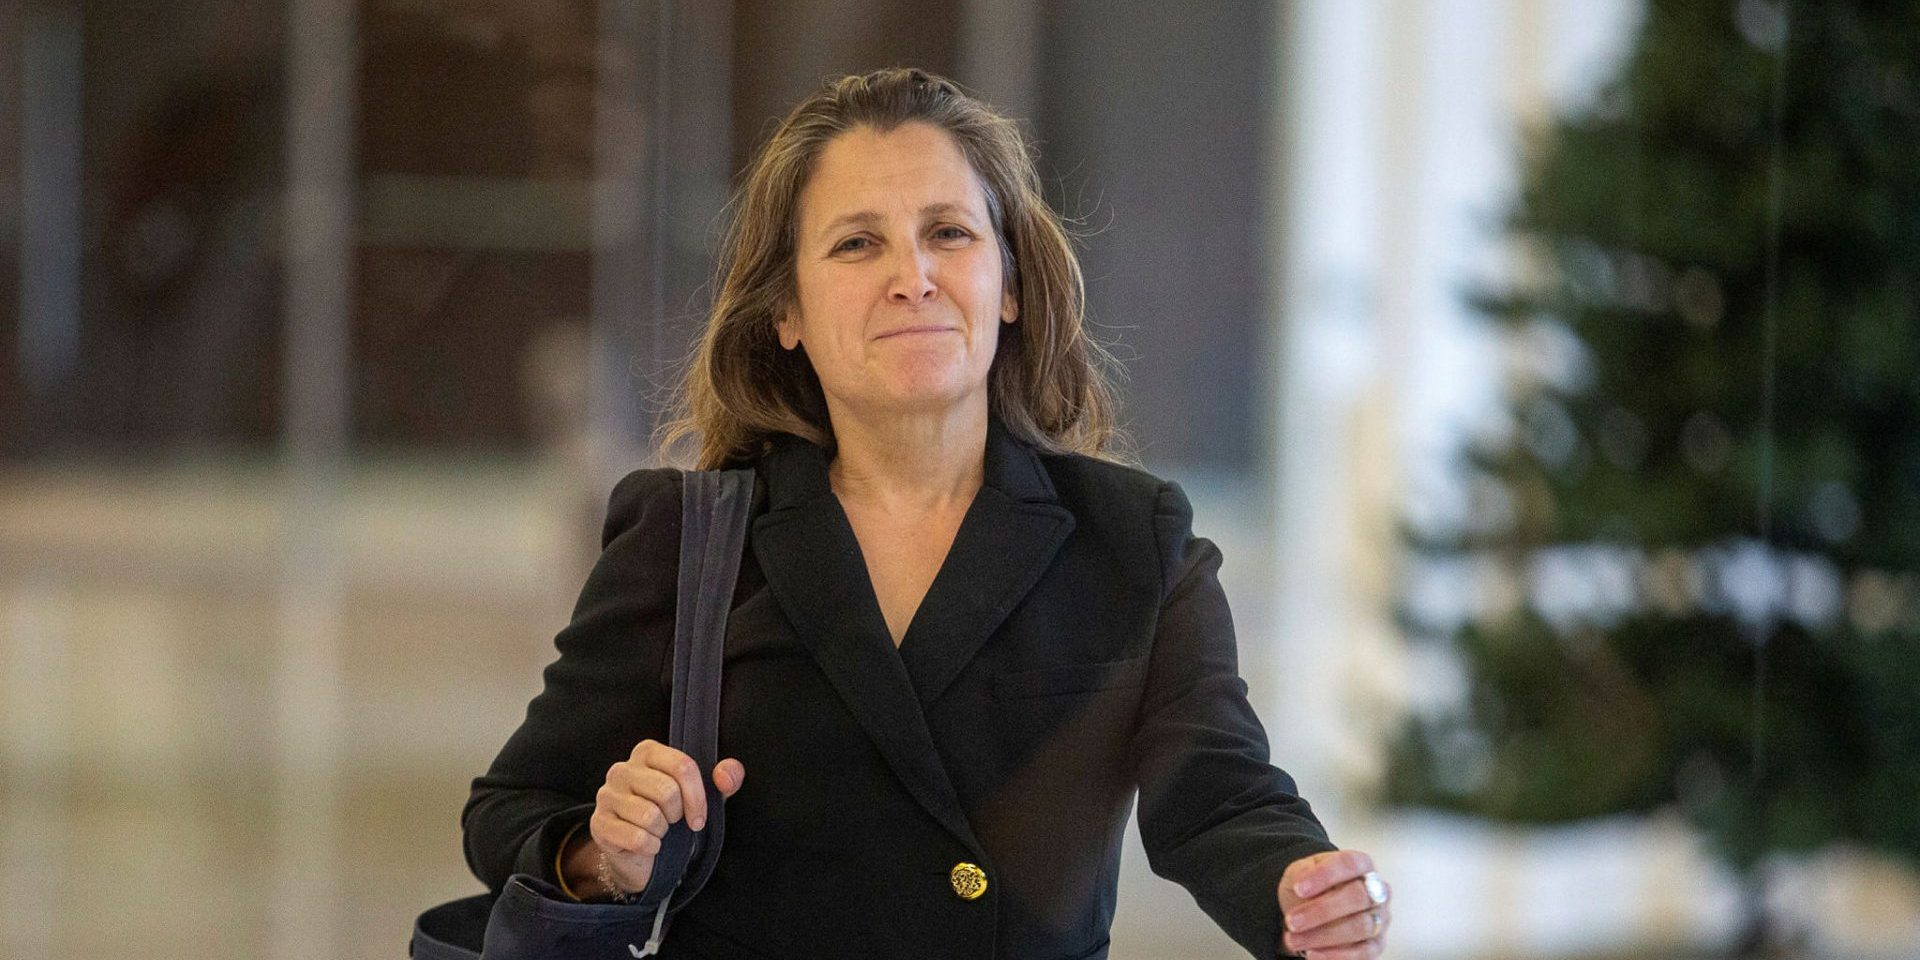 Minister of Finance Chrystia Freeland arrives for the House of Commons standing committee on Finance meeting in Ottawa on  Nov. 28, 2022. The Hill Times photograph by Andrew Meade